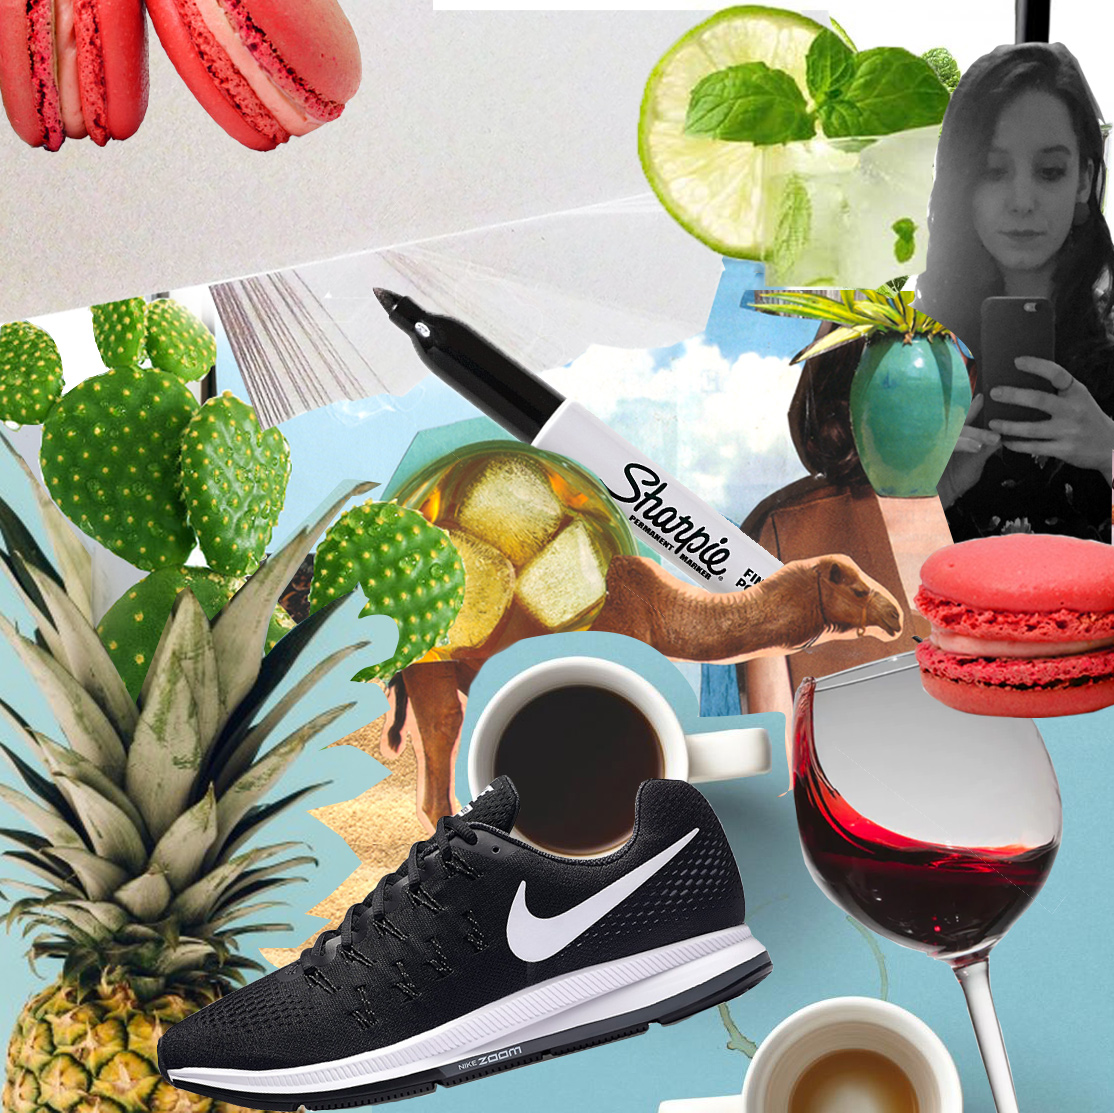 Collage showing things I like the most.